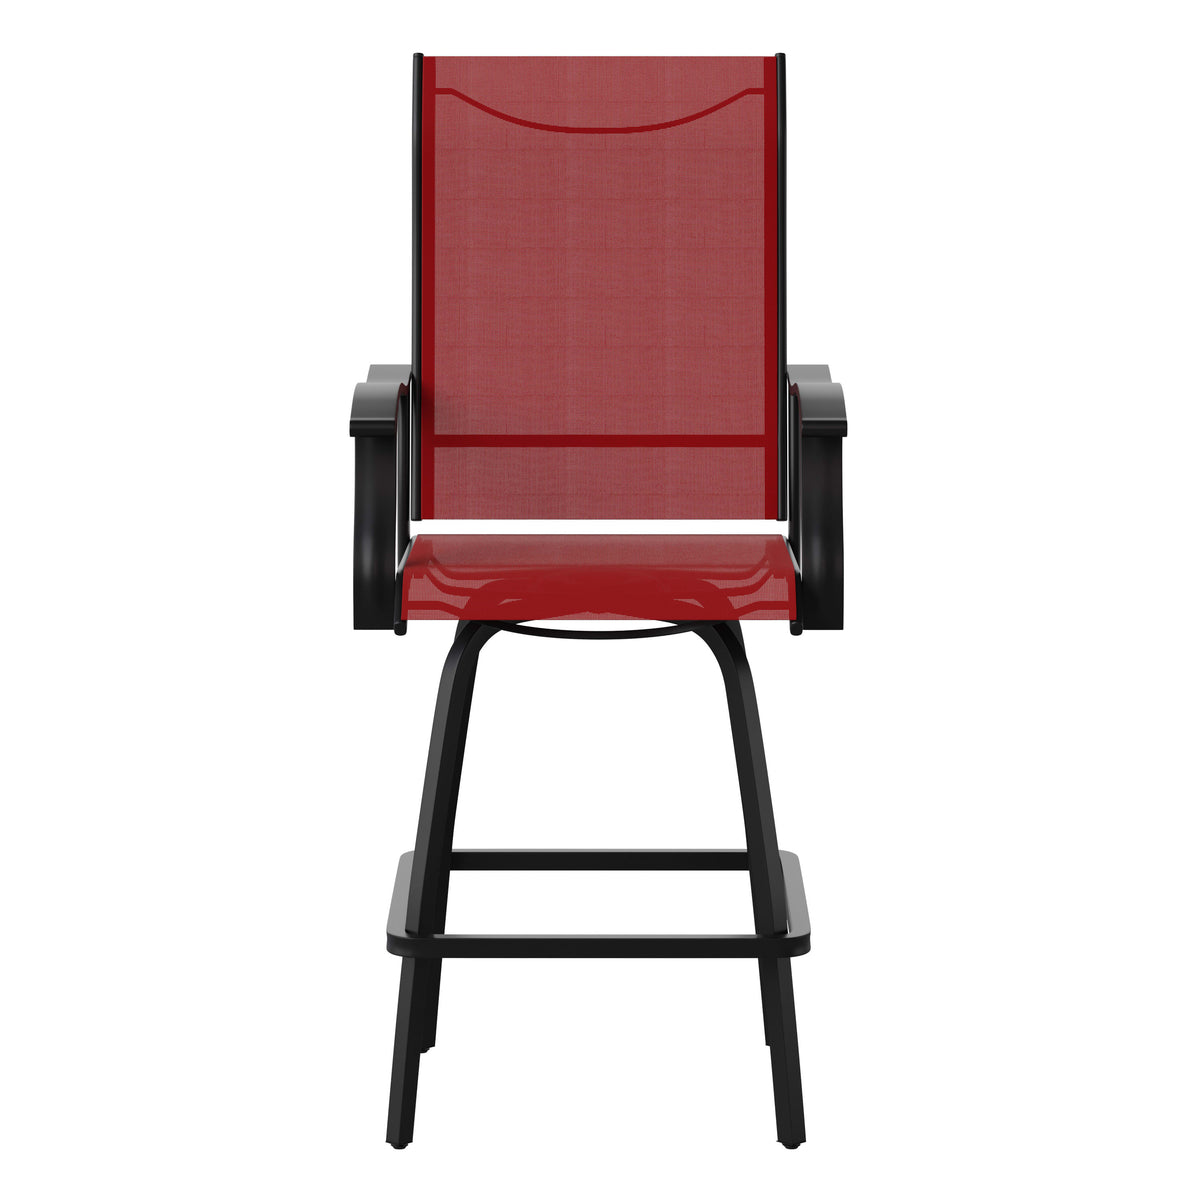 Red |#| Outdoor Stool - 30 inch Patio Bar Stool / Garden Chair, Red(Set of 2)